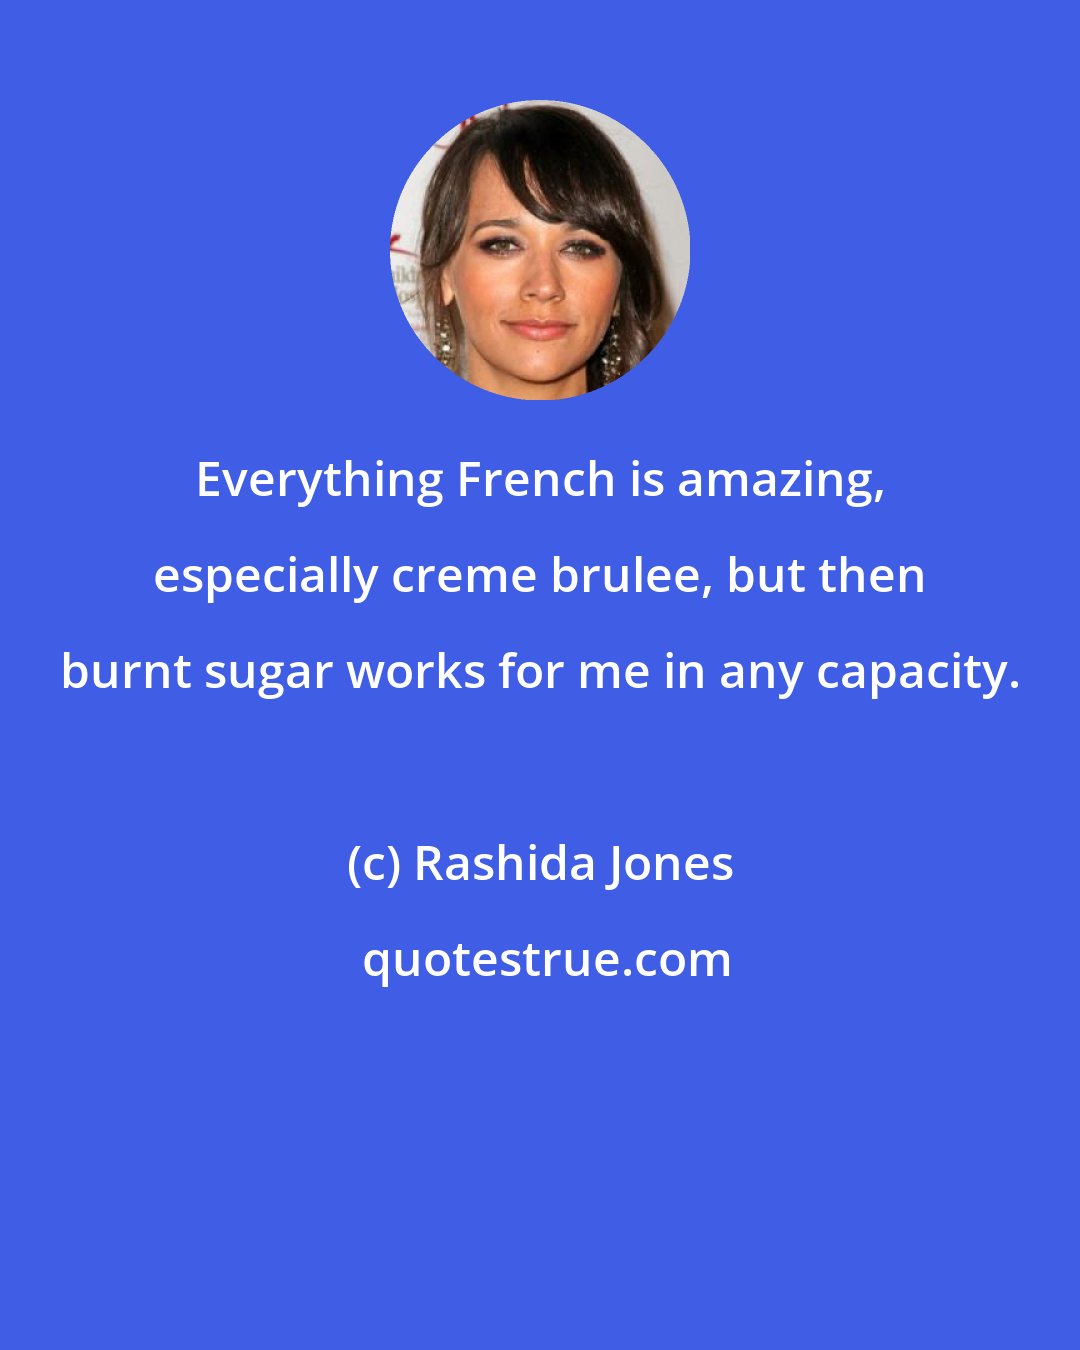 Rashida Jones: Everything French is amazing, especially creme brulee, but then burnt sugar works for me in any capacity.